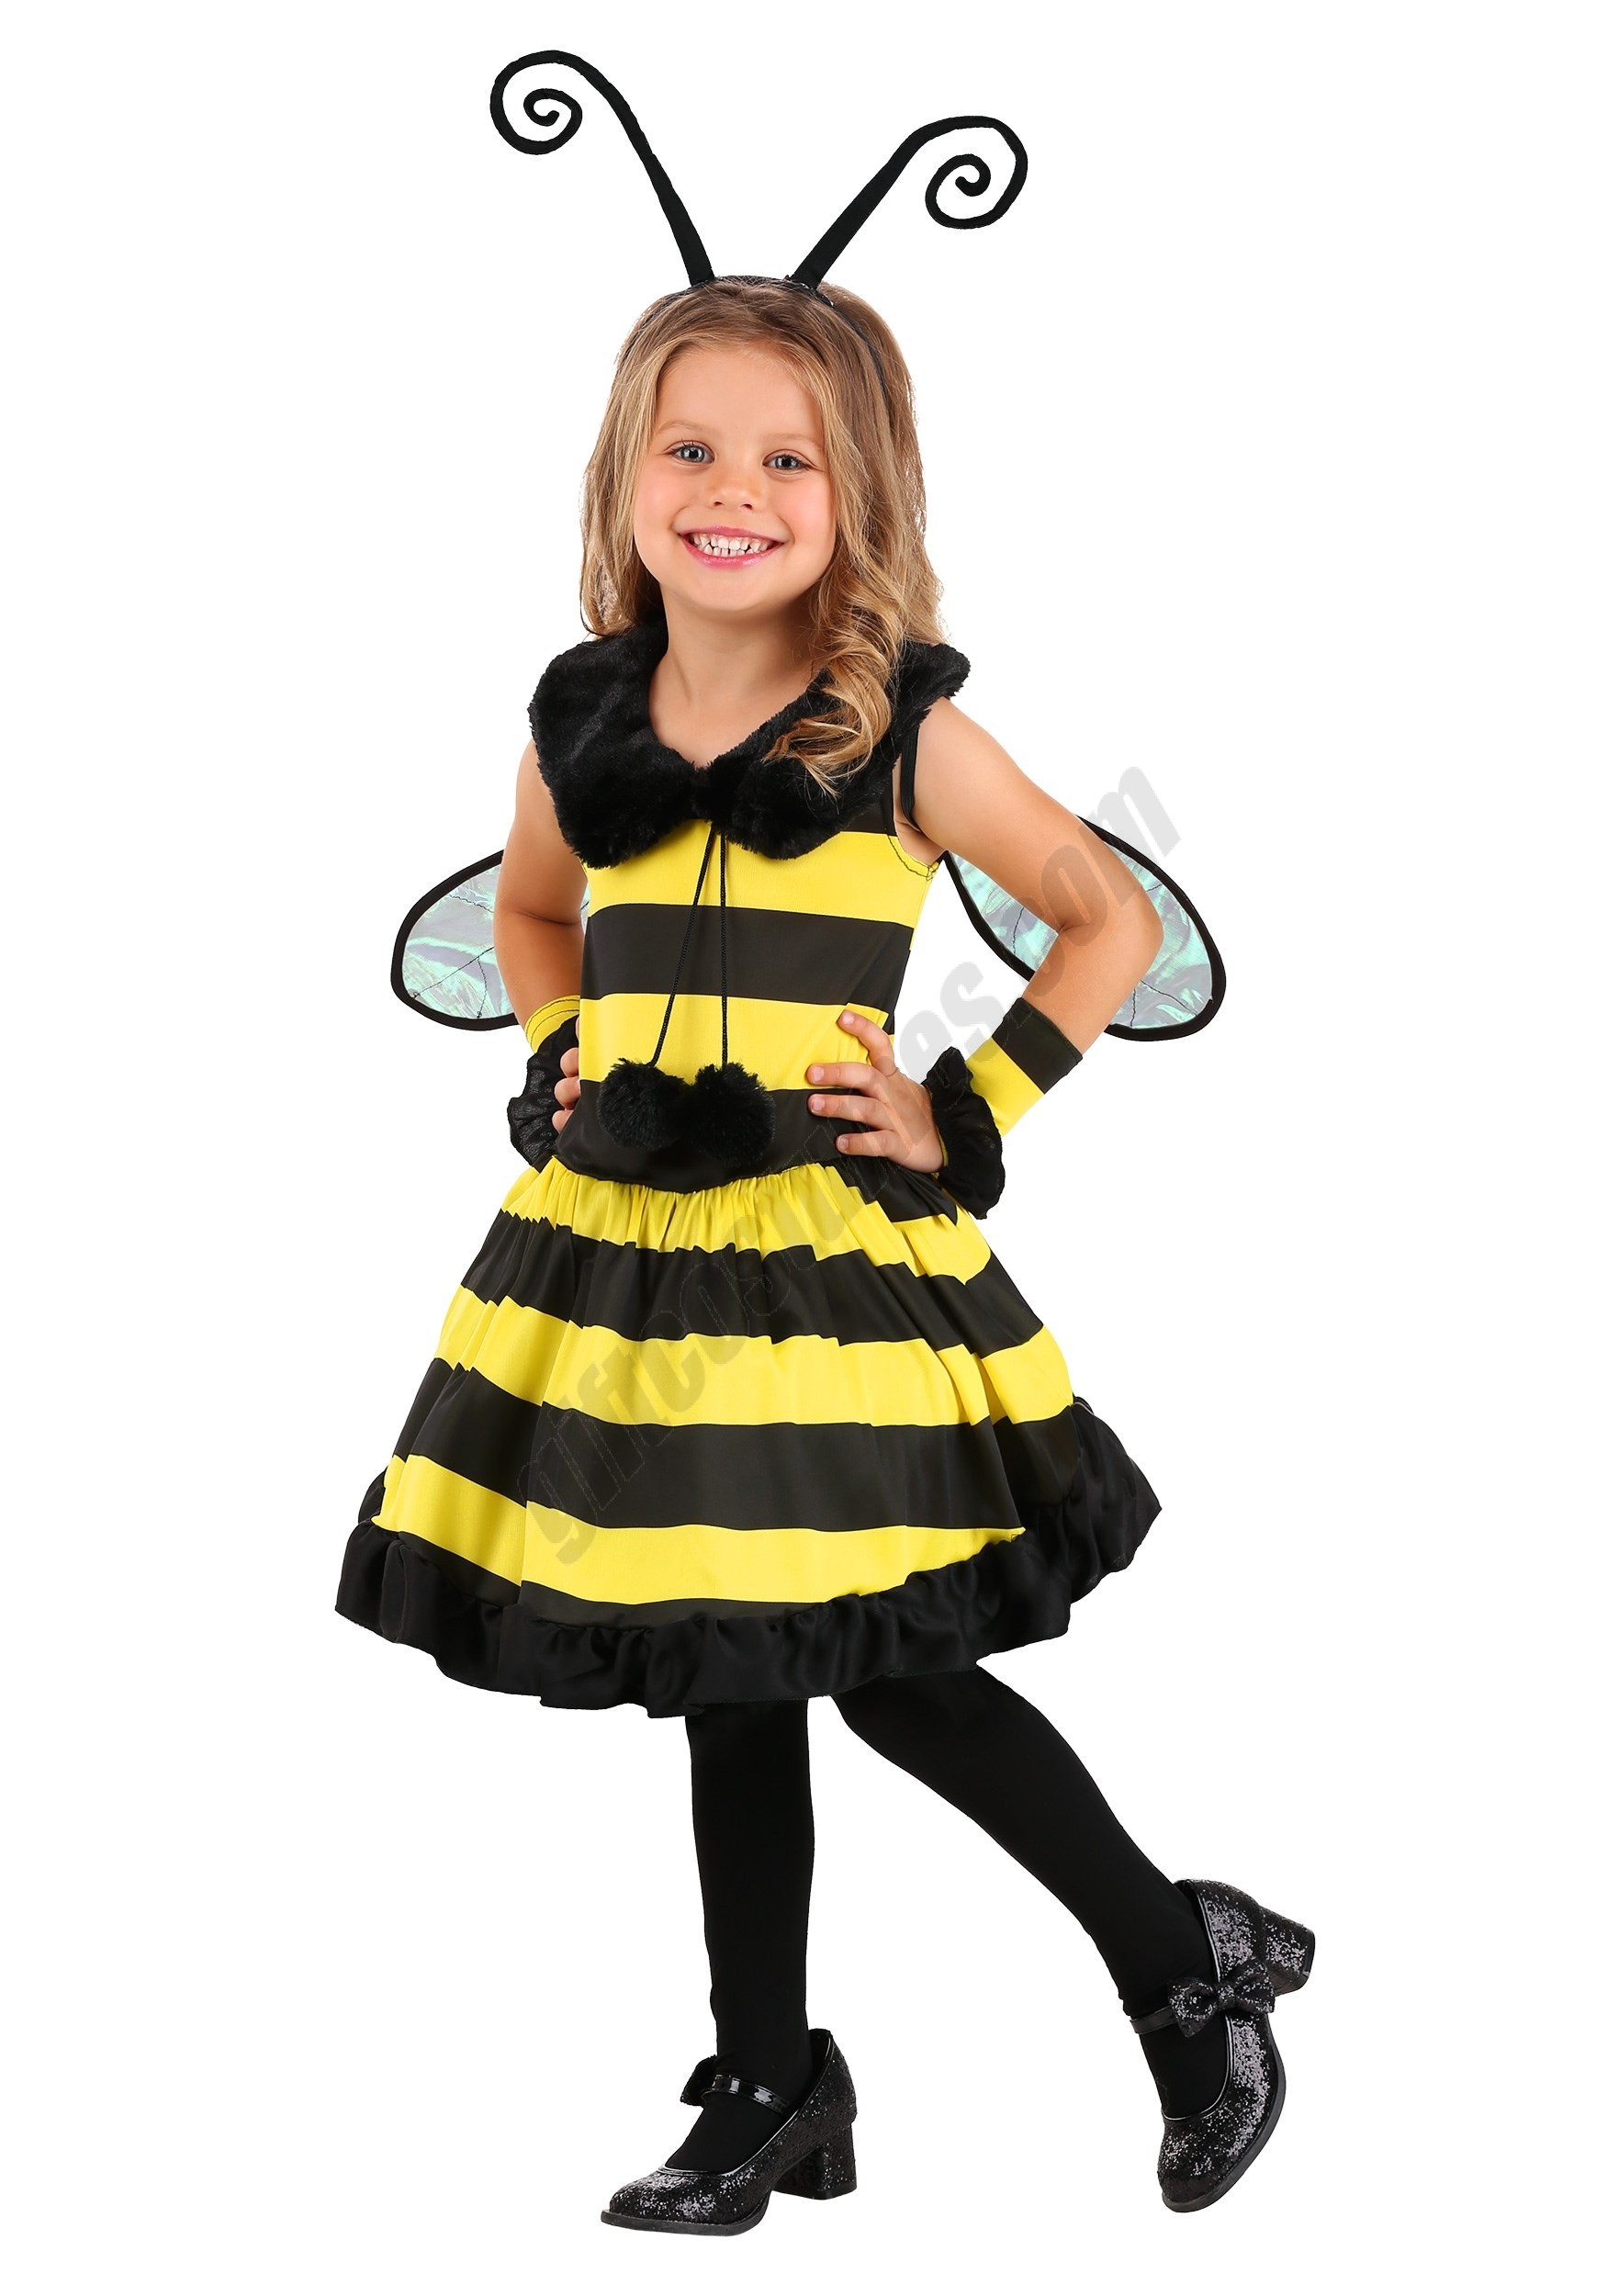 Toddler Girl's Deluxe Bumble Bee Costume Promotions - Toddler Girl's Deluxe Bumble Bee Costume Promotions